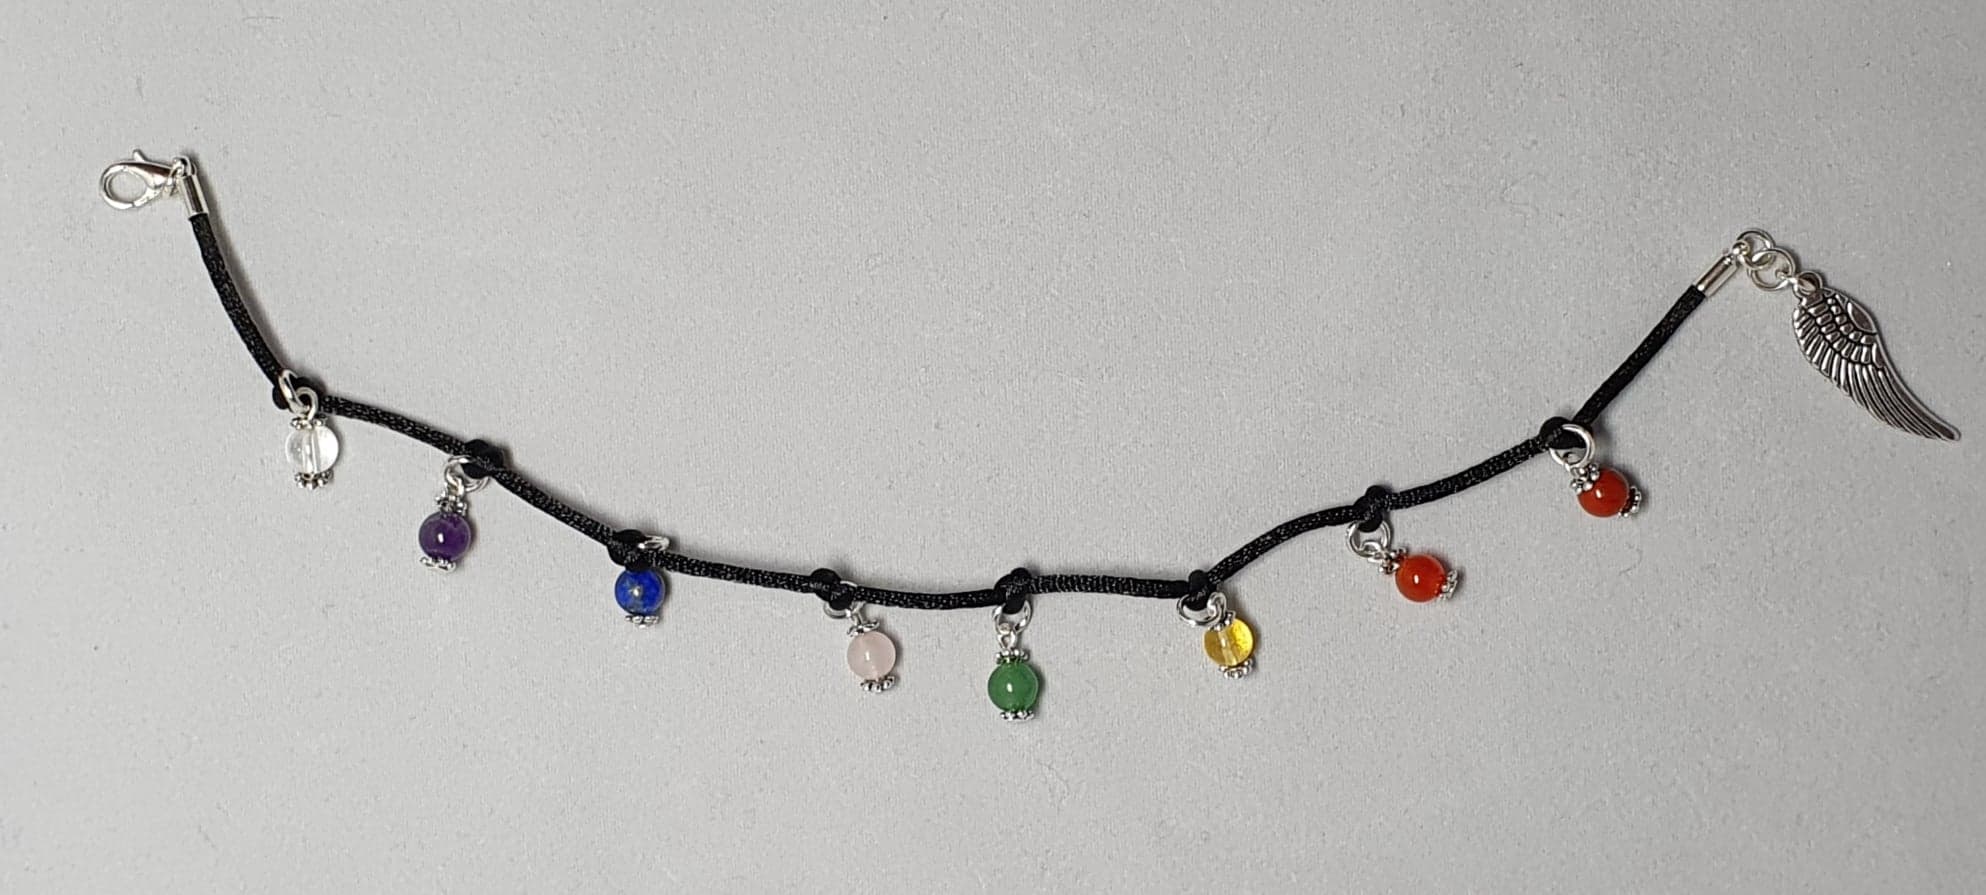 Anklet knotted satin cord with chakra crystals & choice of charm